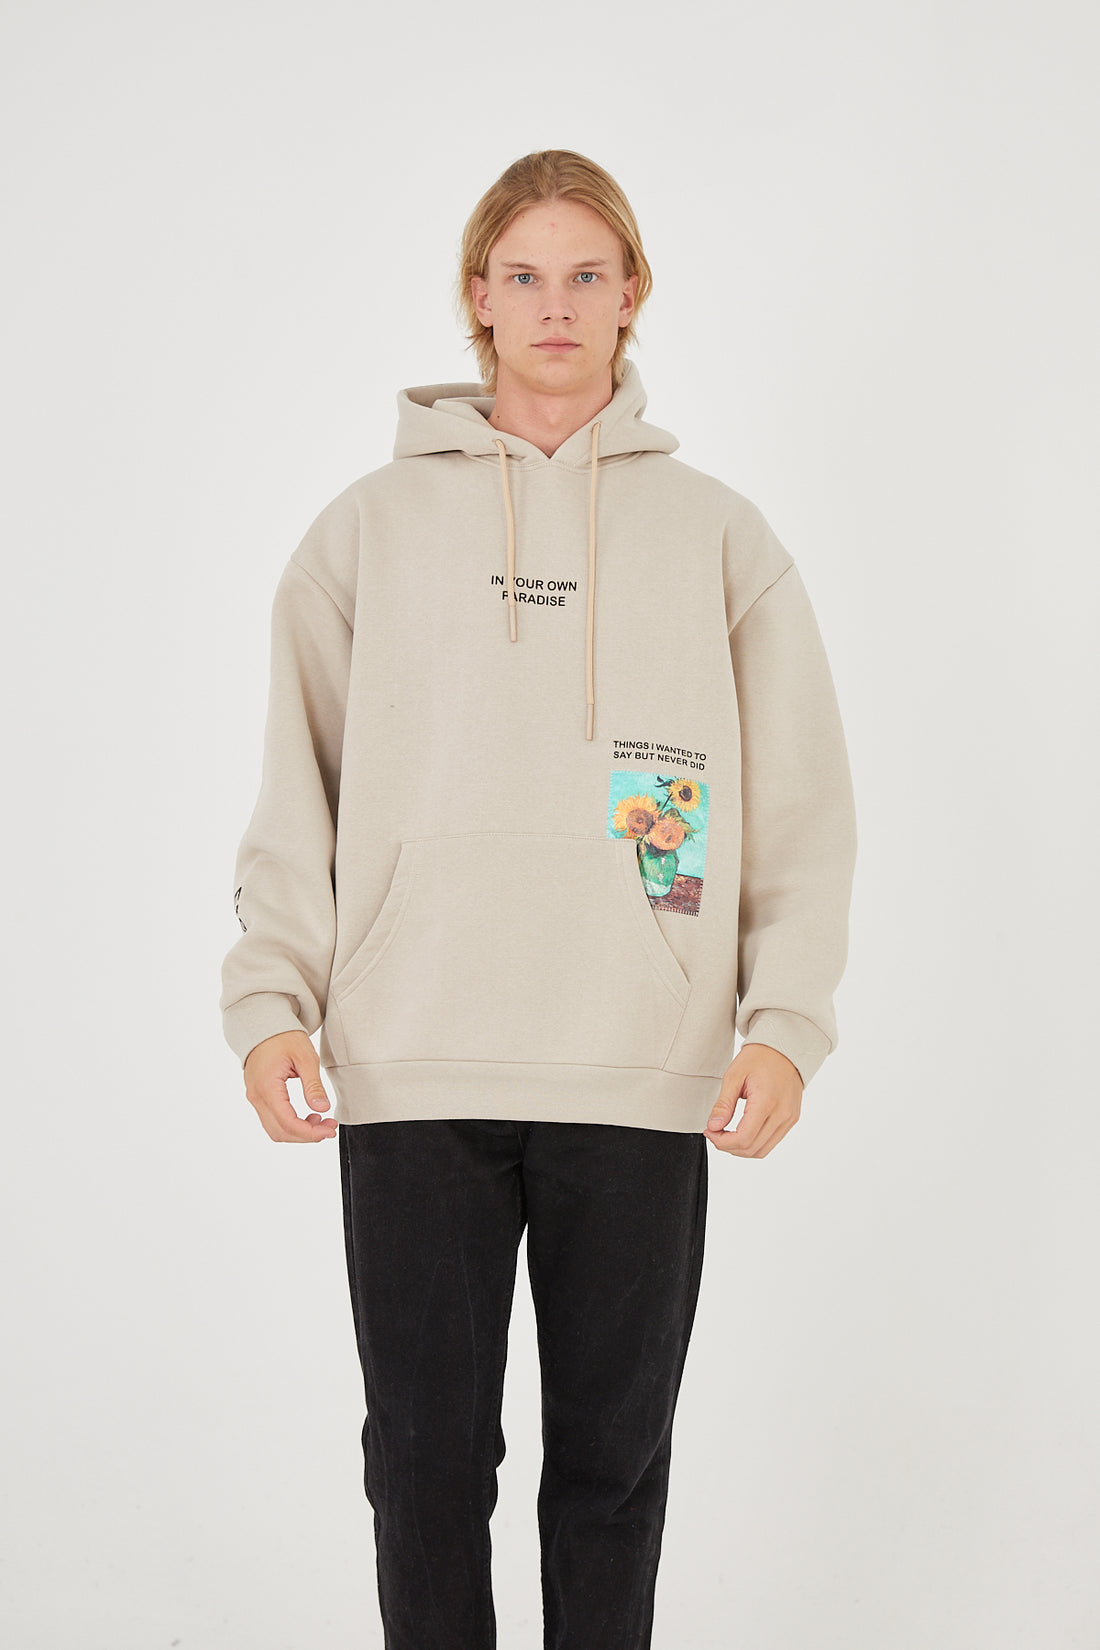 HOODIE - IN YOUR OWN PARADISE - BEIGE - DYS-Amsterdam